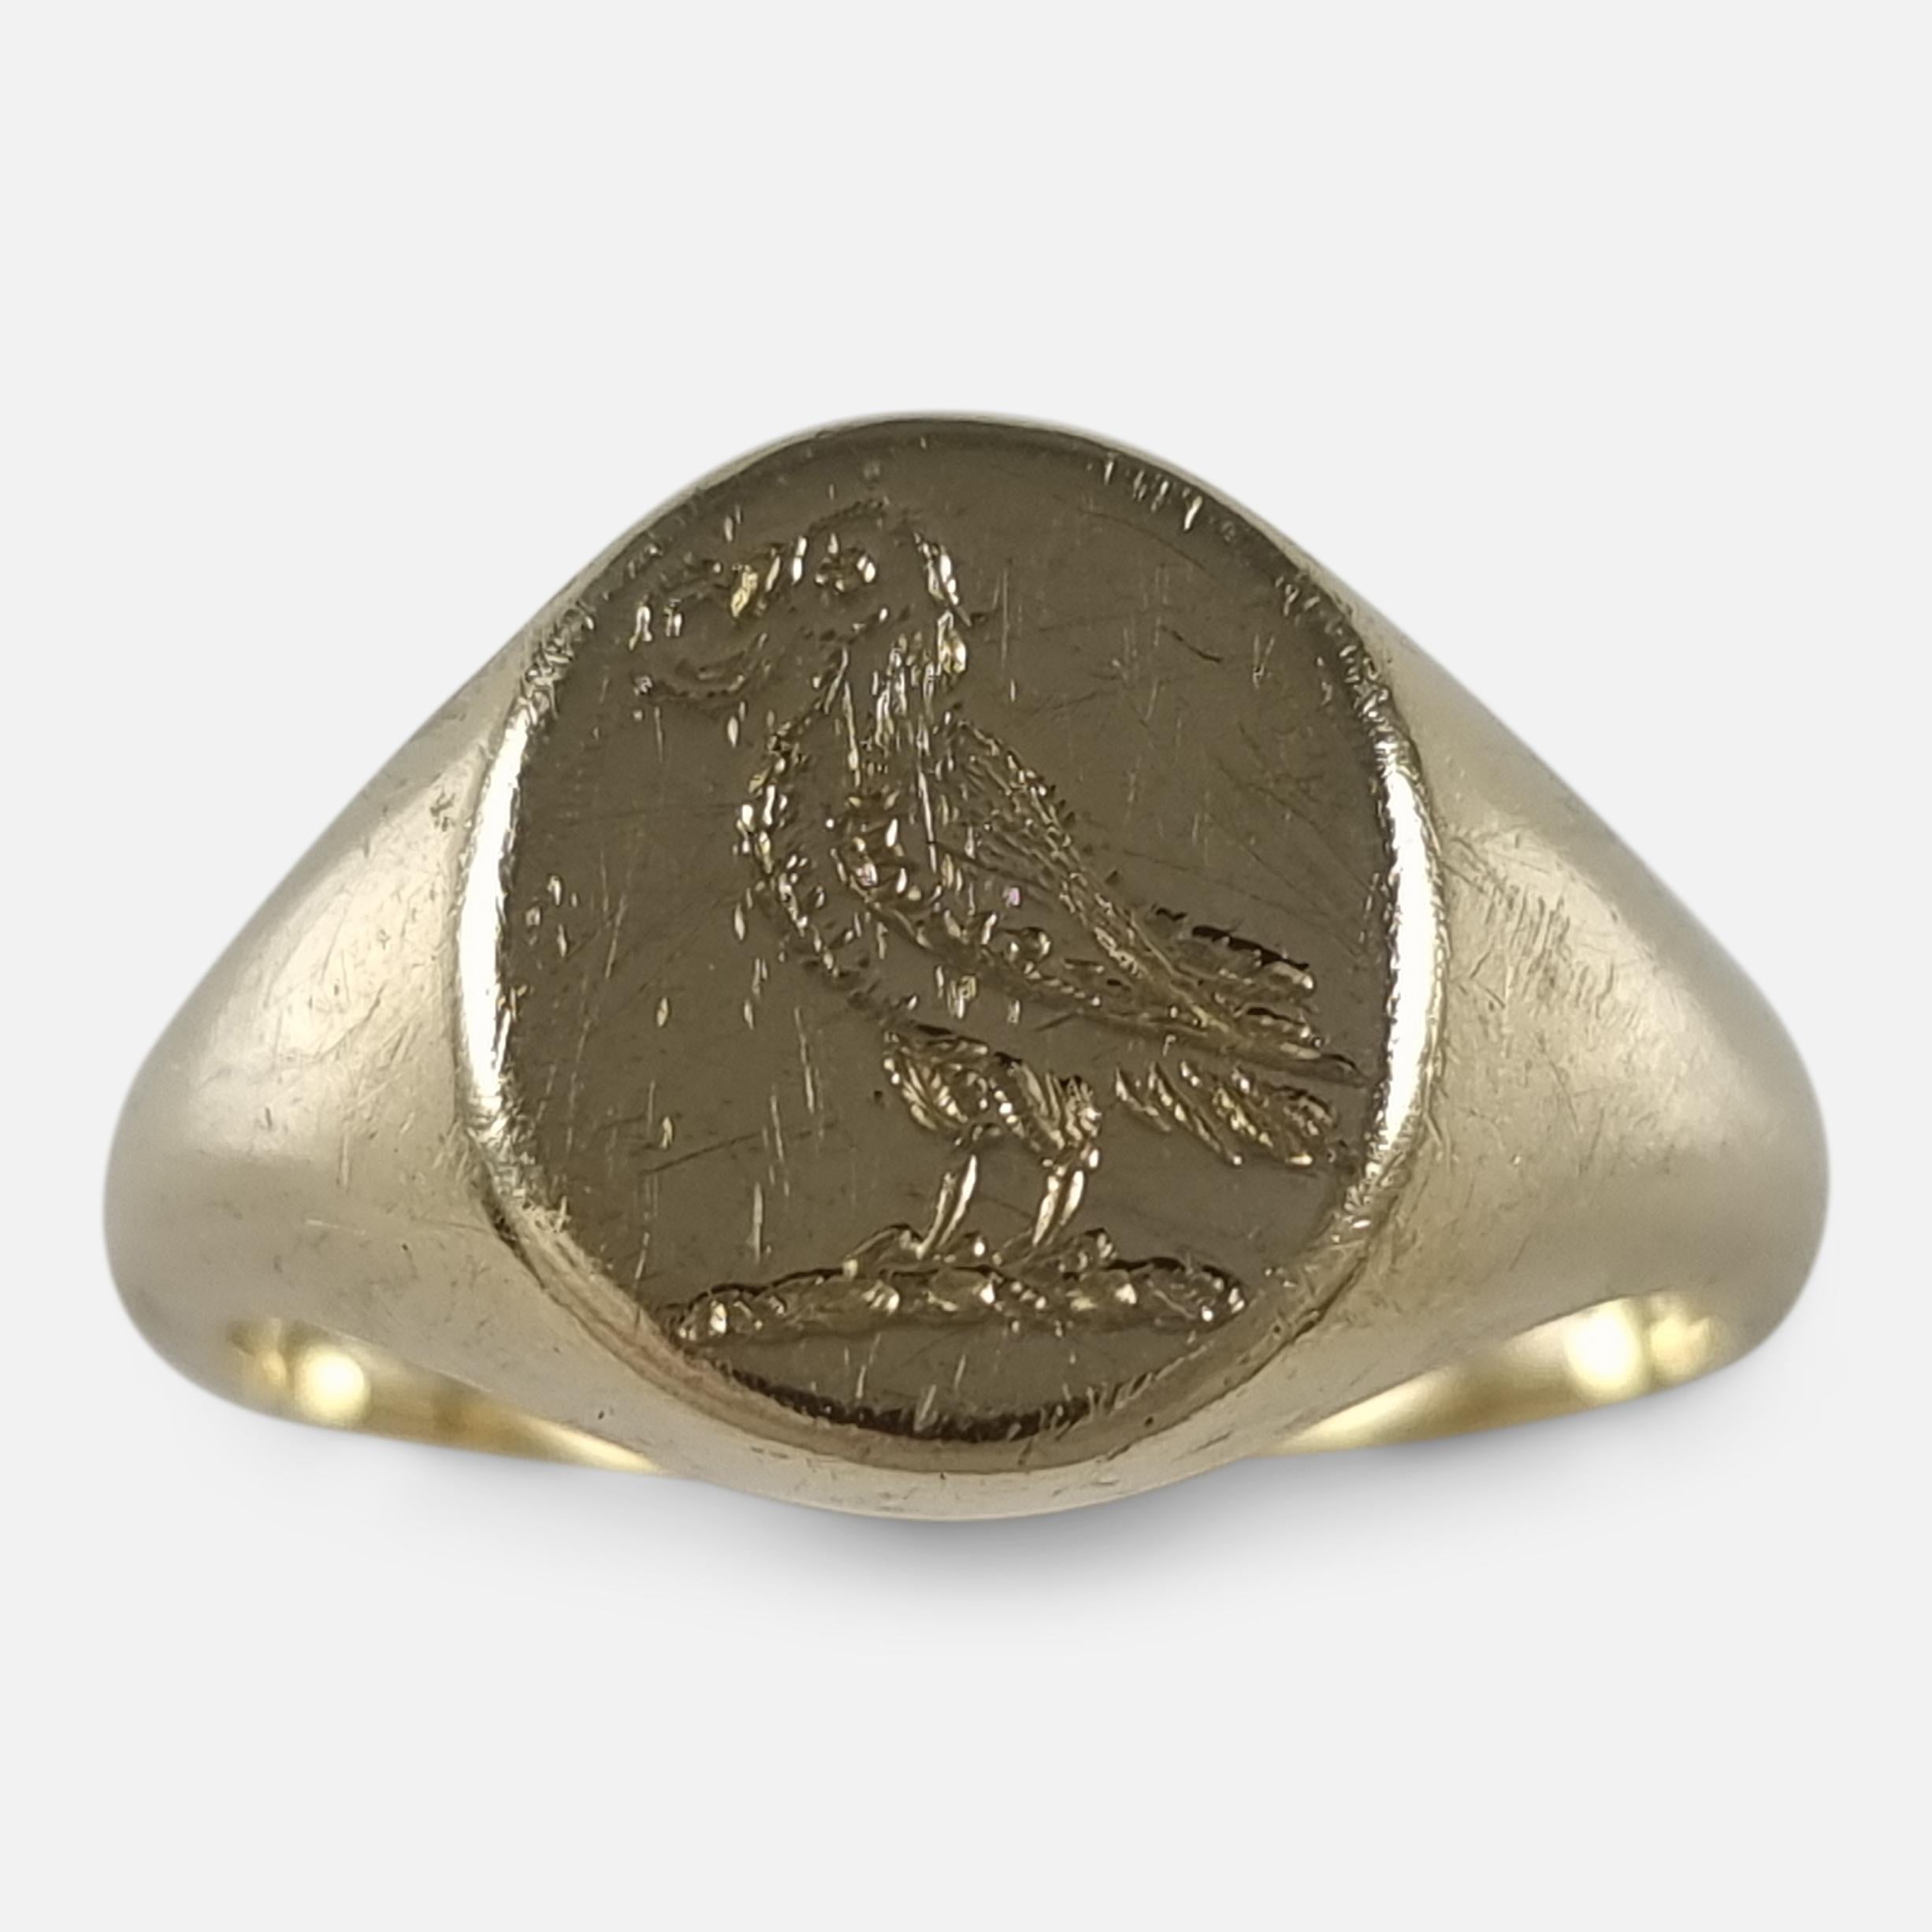 An Elizabeth II 18ct yellow gold signet ring. The signet ring is of oval form to the head with engraved intaglio family crest of a parrot, holding an annulet in its beak, leading to a plain shank.

The ring is hallmarked with Birmingham assay office